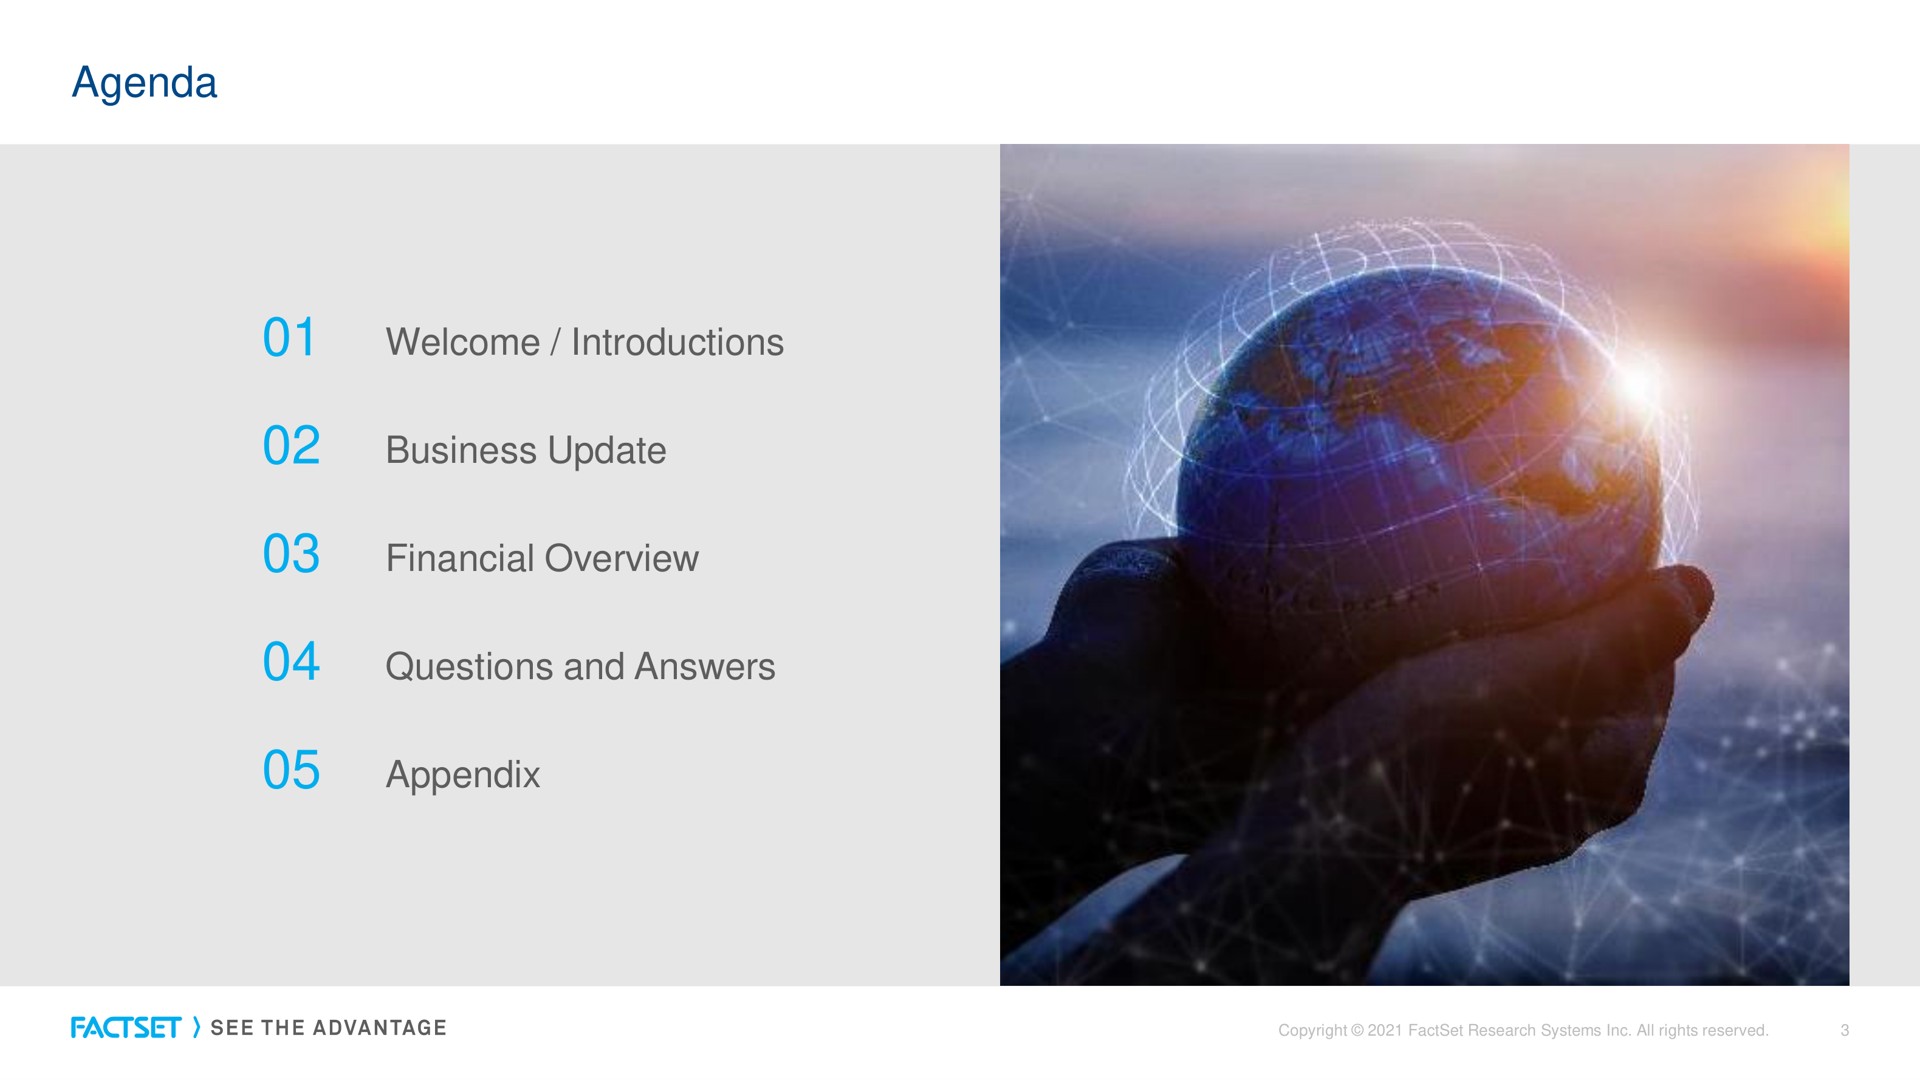 agenda welcome introductions business update financial overview questions and answers appendix | Factset